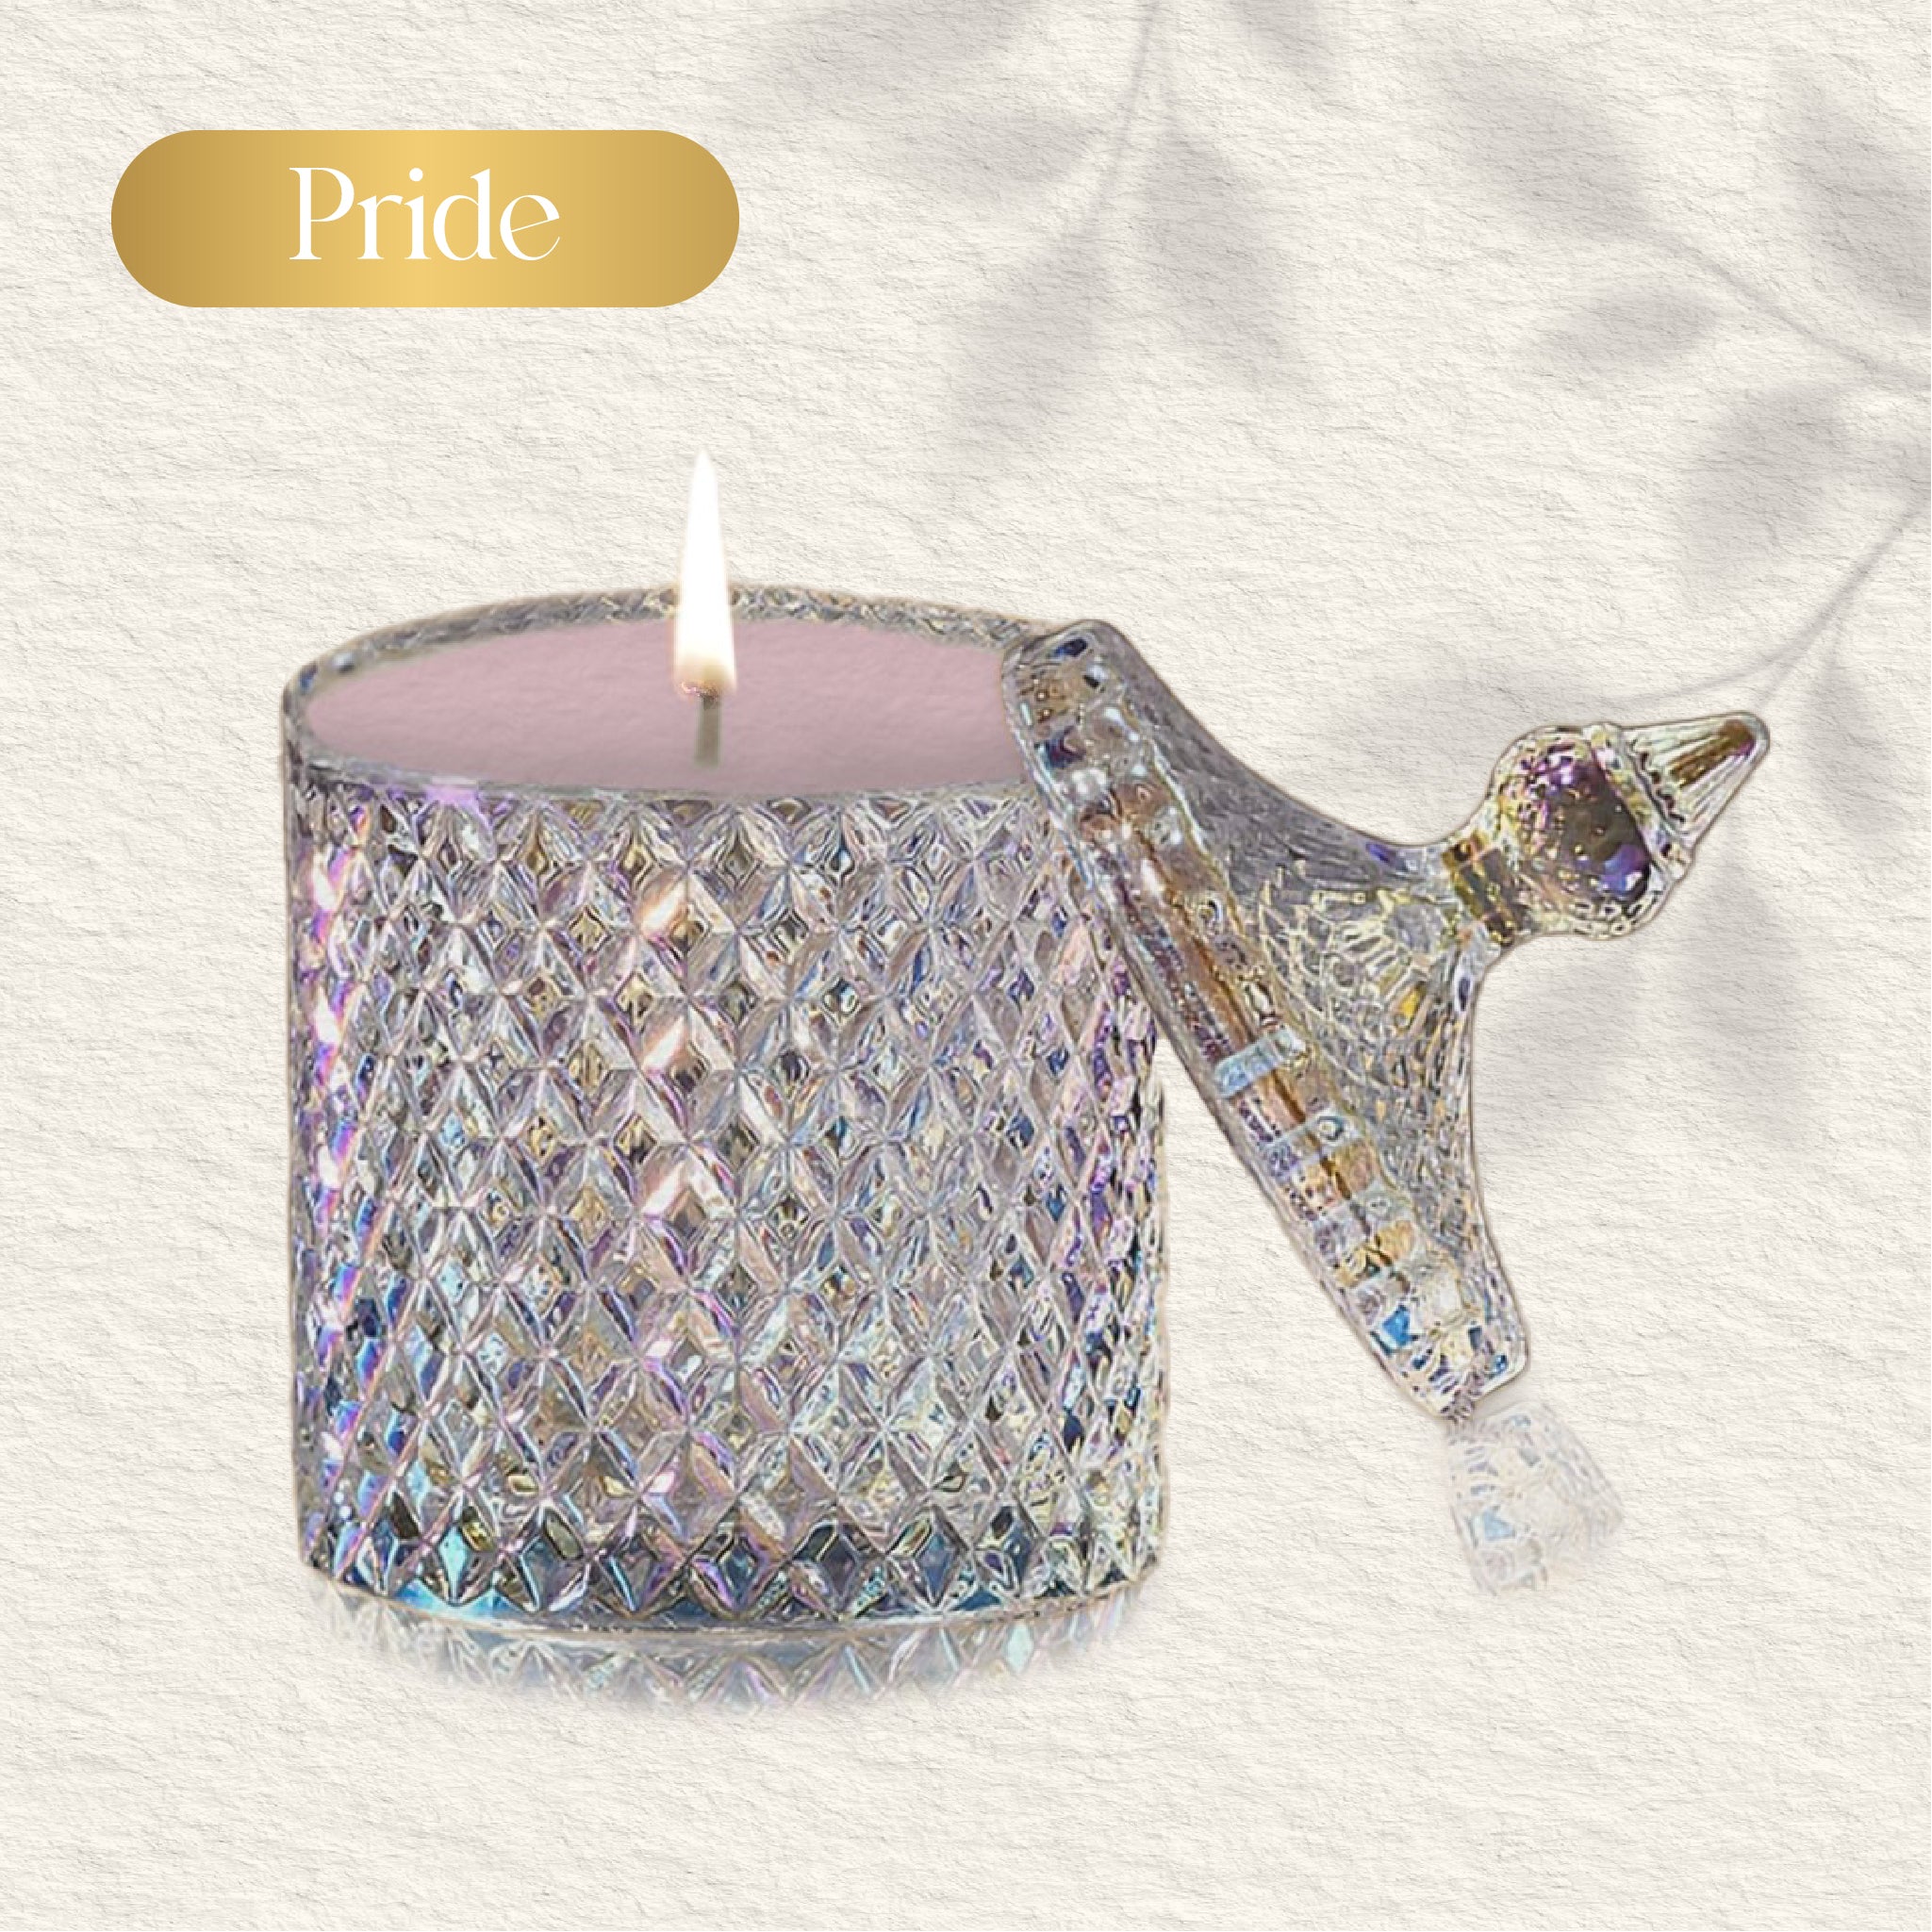 Empower your space with our Pride Scented Candle - Maries Blazing Aroma